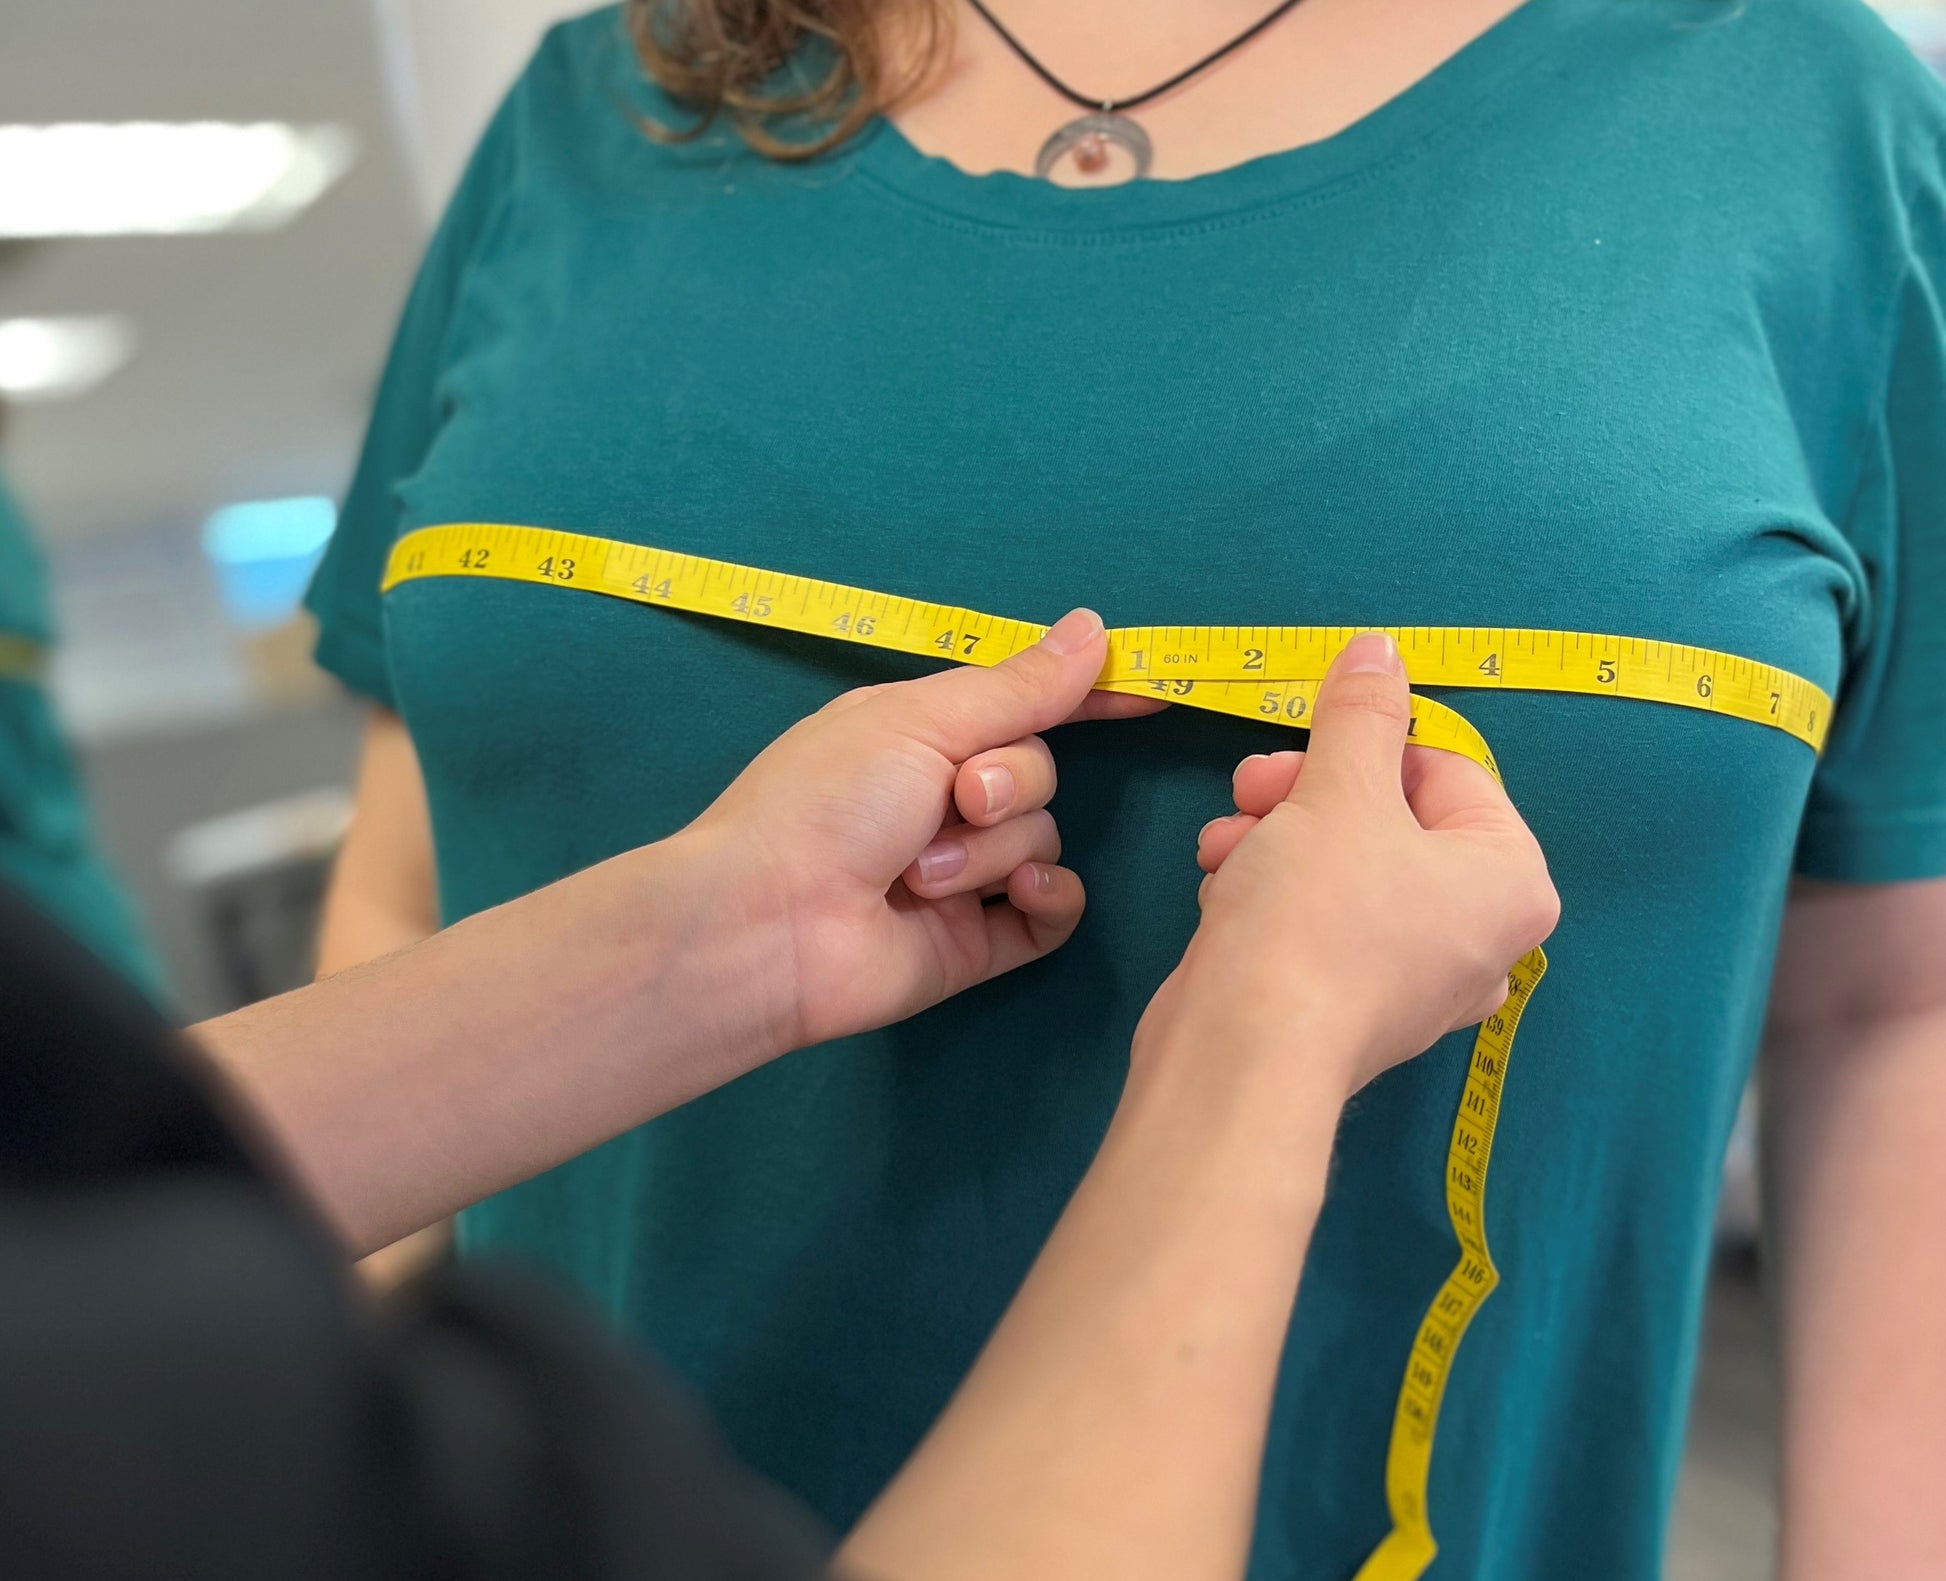 Tape measure being displayed by seamstress measuring a woman's bust.